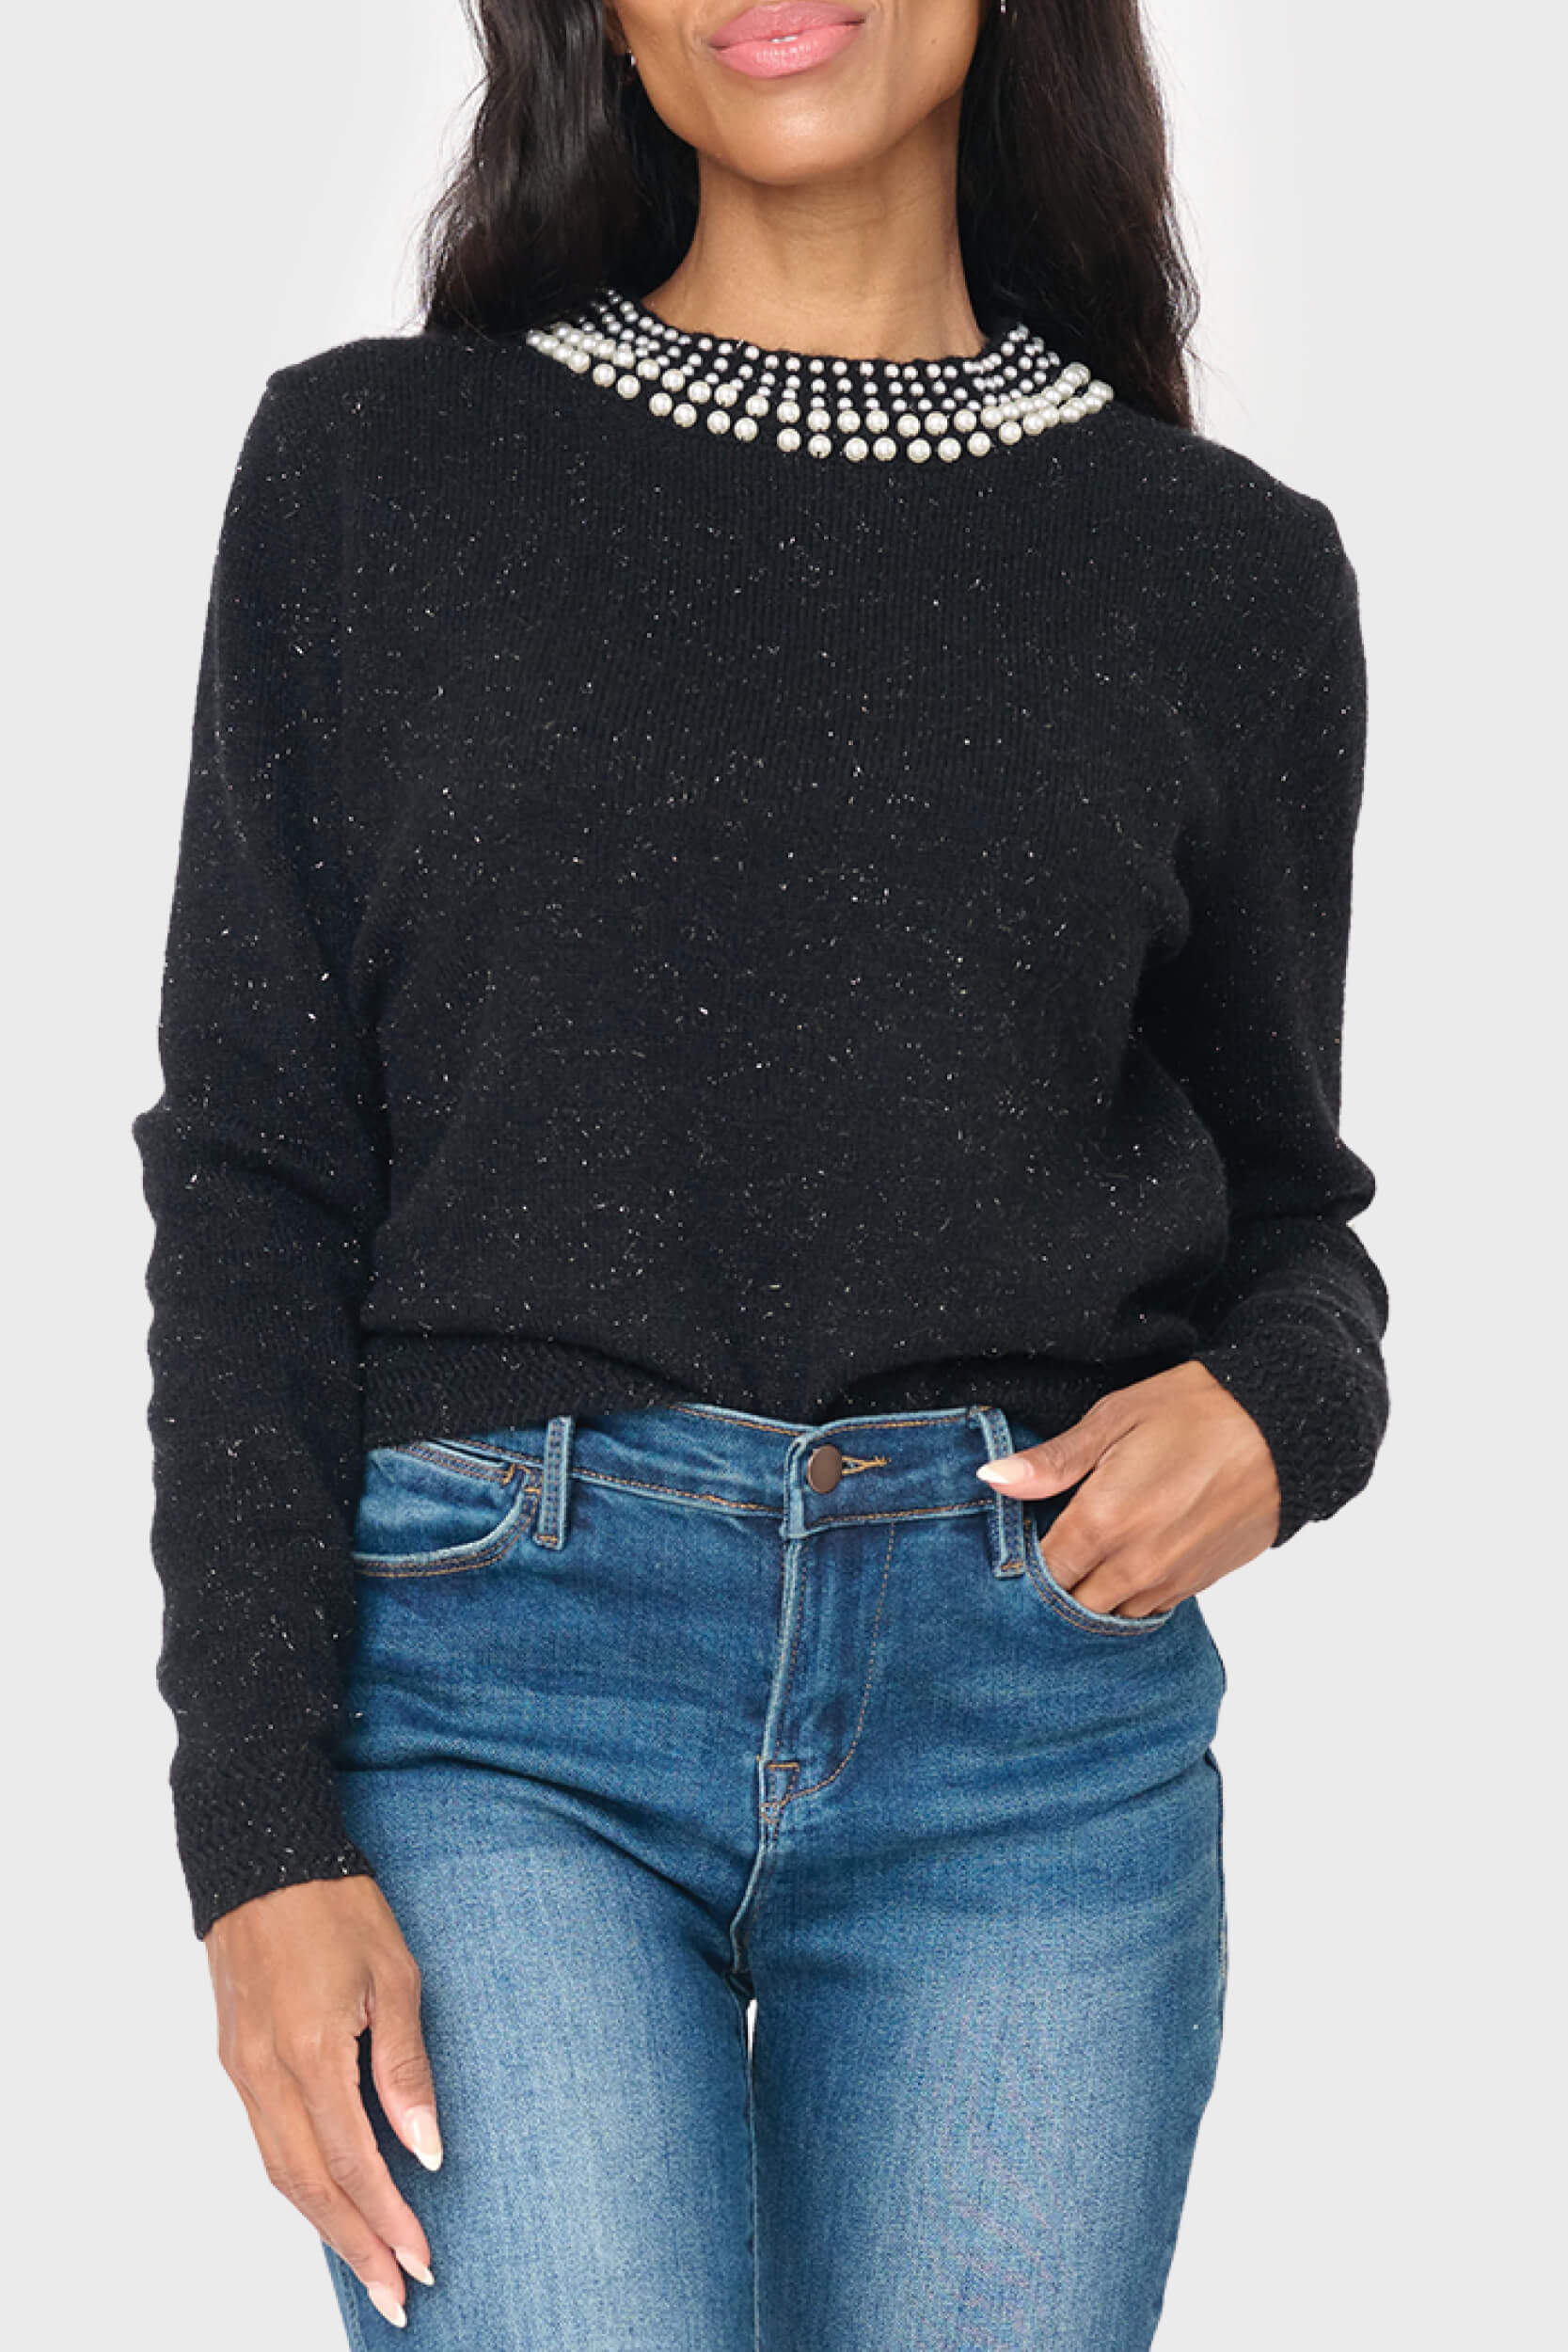 Soiree Sweater With Pearl Embellished Collar - Black / XXS